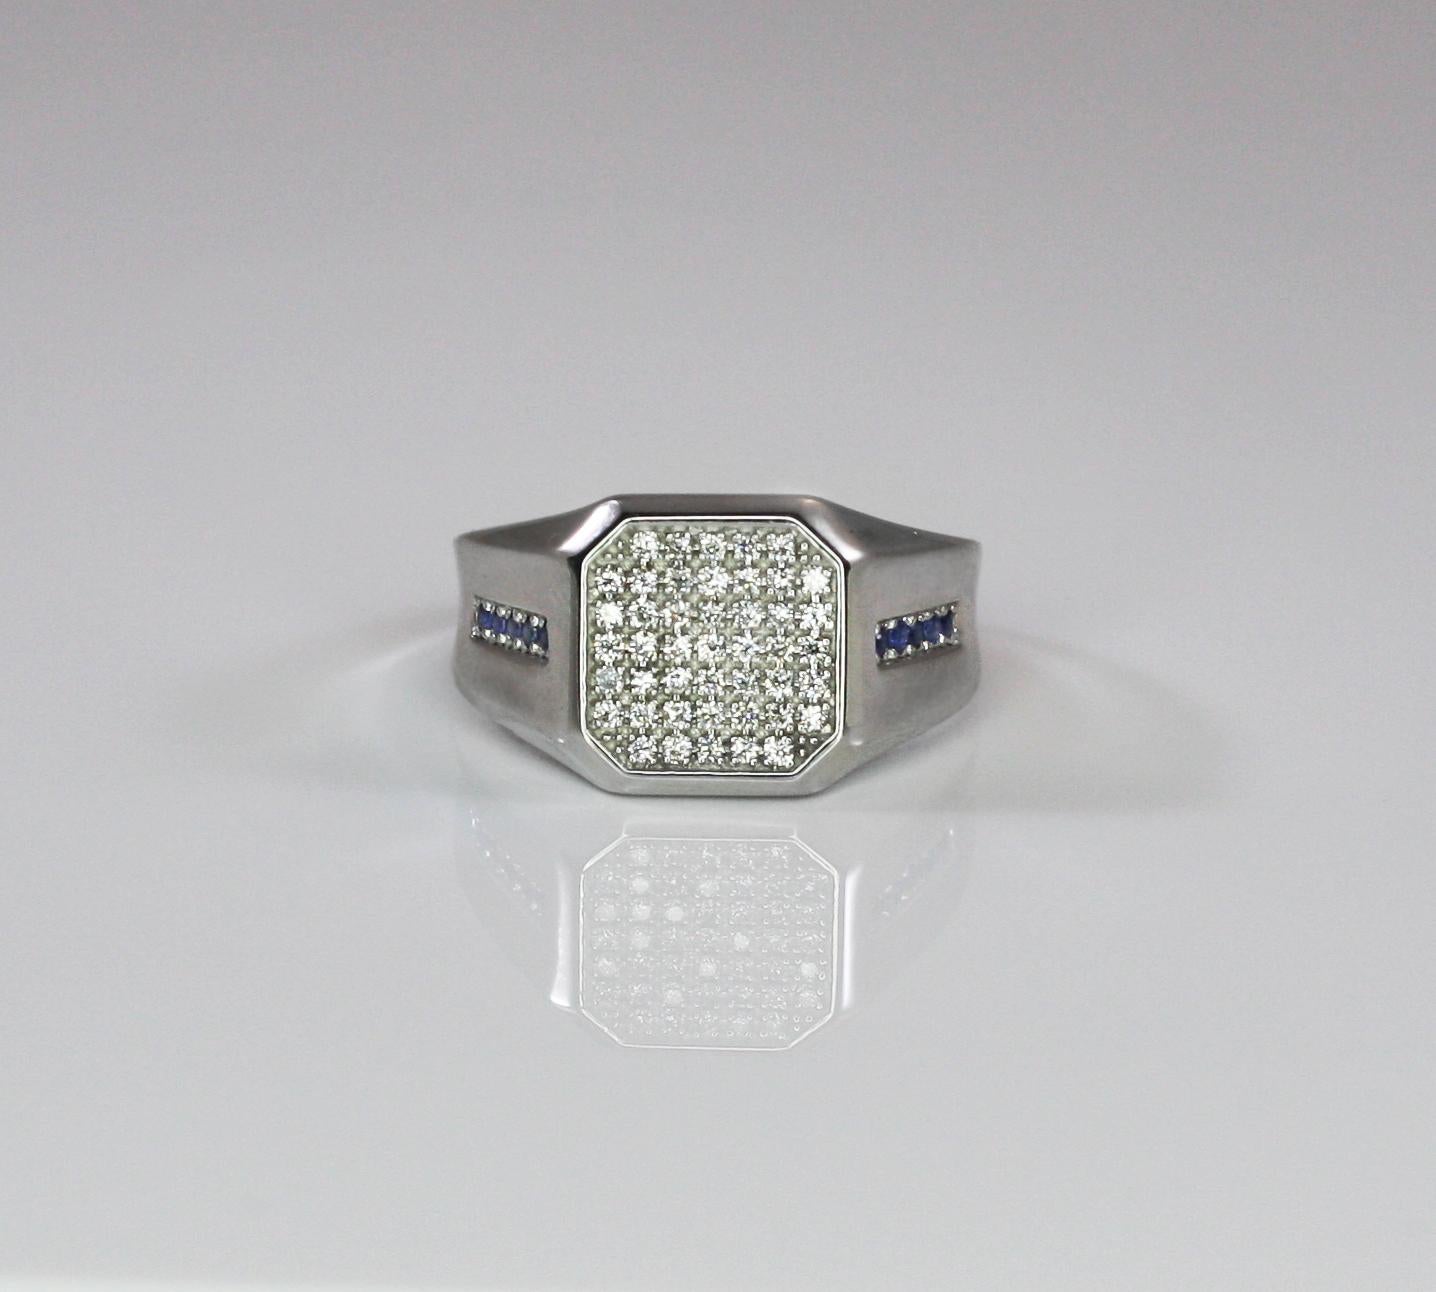 This S.Georgios designer Unisex Men's Band Ring is all hand-made in 18 Karat White Gold and features an elegant octagon made of 45 stunning brilliant cut natural white Diamonds VVS2 color G total weight of 0.45 Carat. On the two sides of this